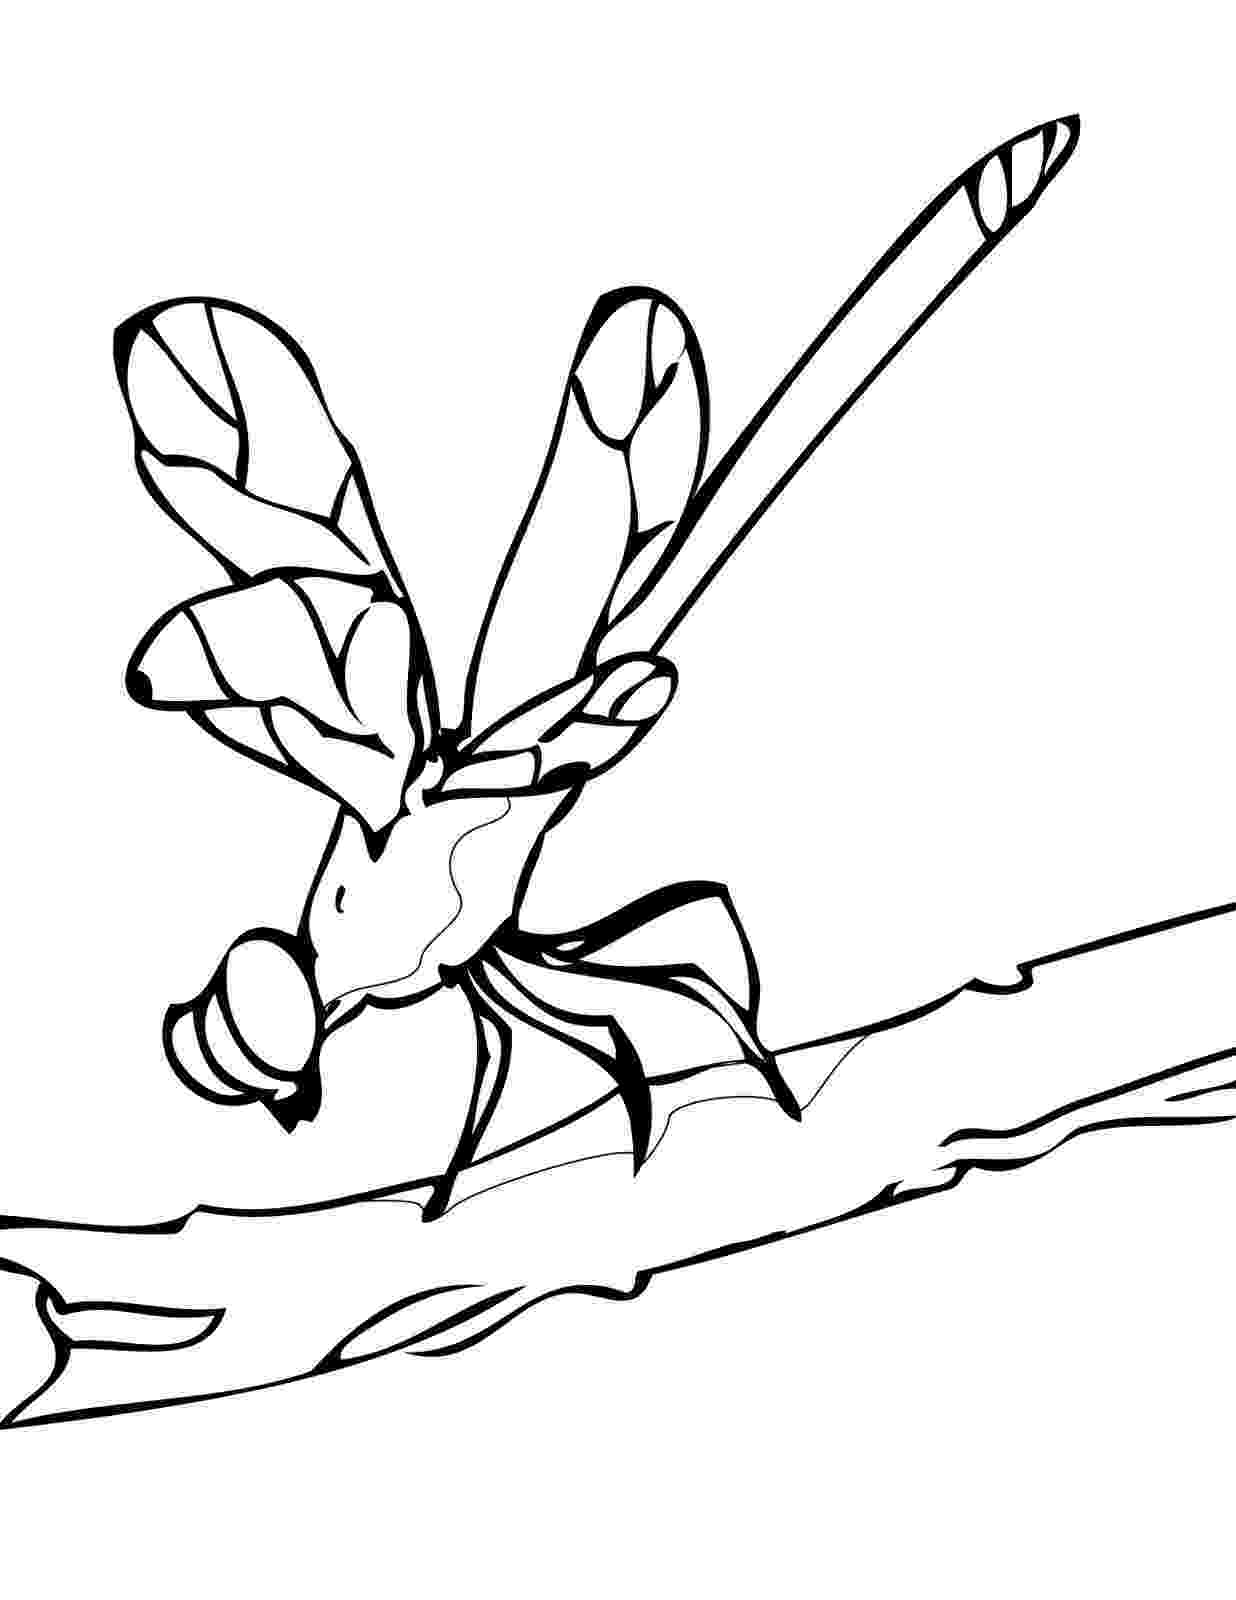 dragonfly coloring free printable dragonfly coloring pages for kids coloring dragonfly 1 2